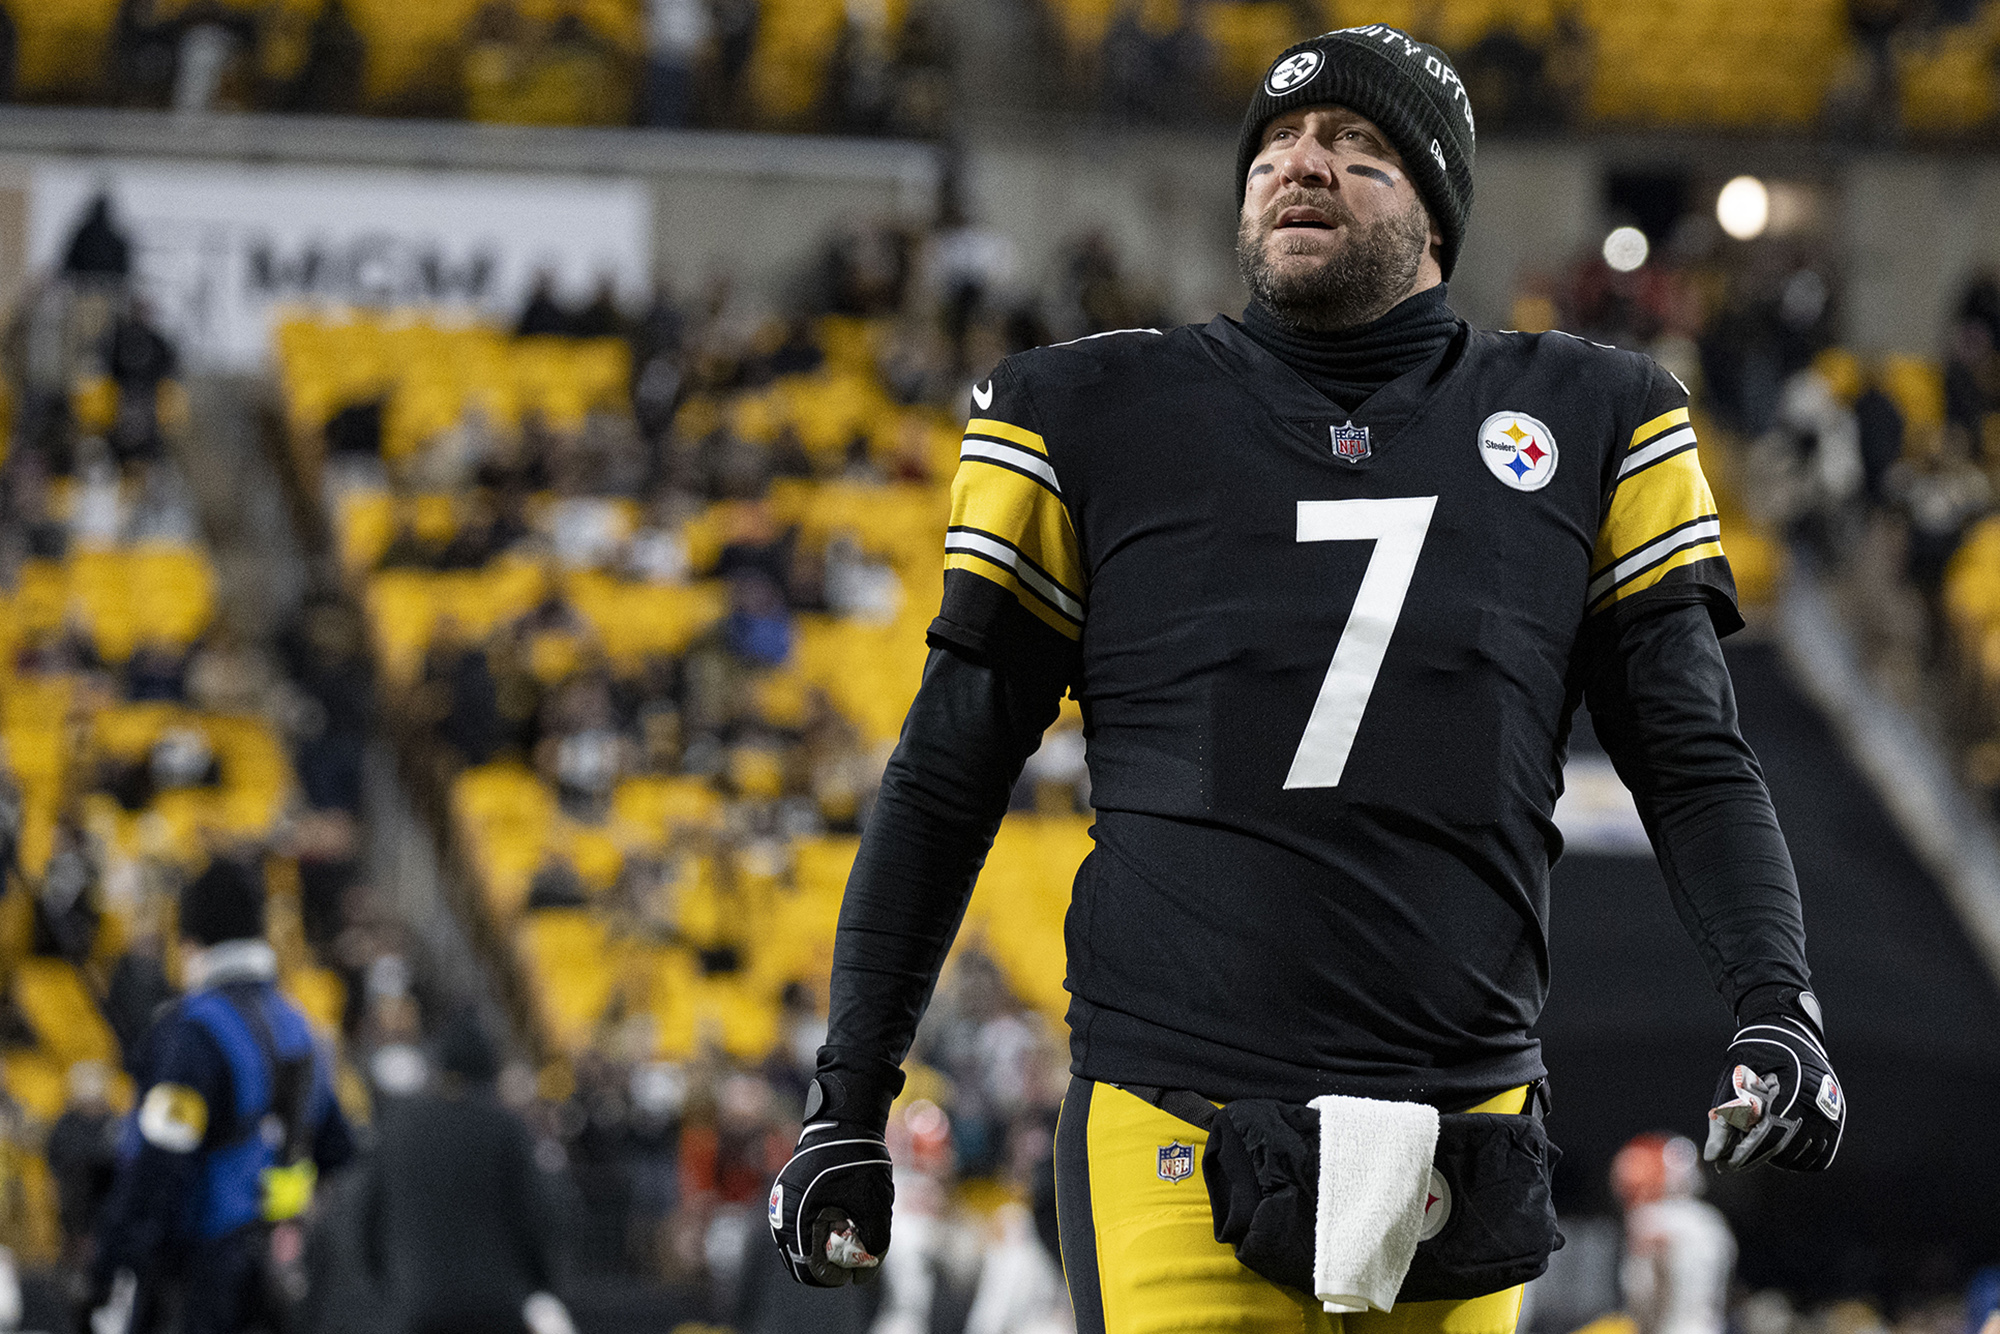 Pittsburgh's Ben Roethlisberger stands on the field and looks at the crowd during his last game at Heinz Field.